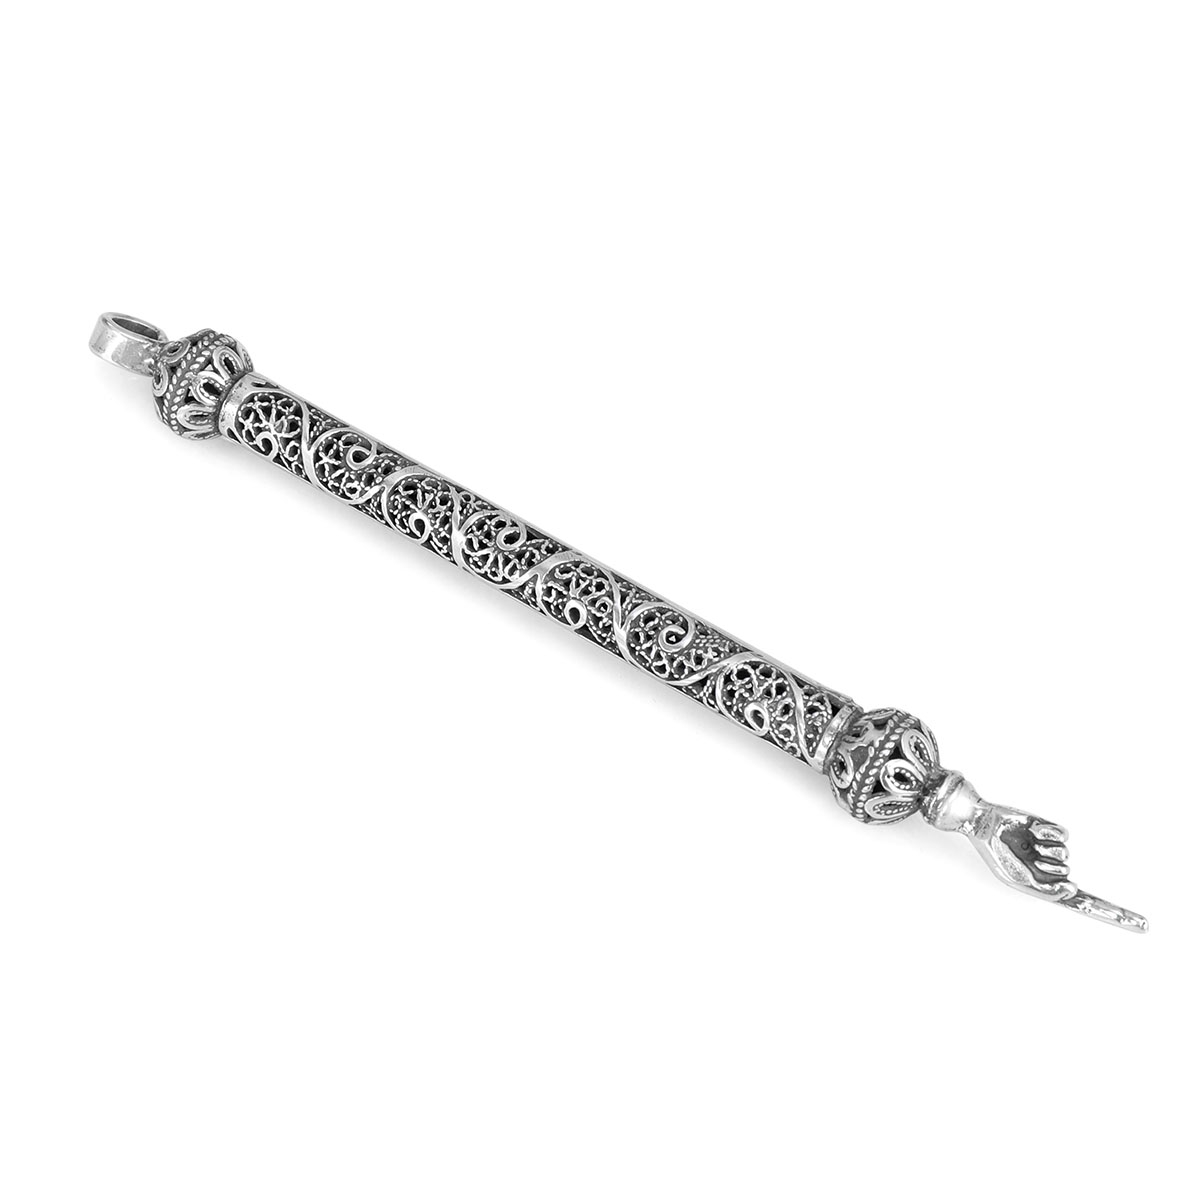 Traditional Yemenite Art Handcrafted Sterling Silver Torah Pointer With Stylish Filigree Design - 1